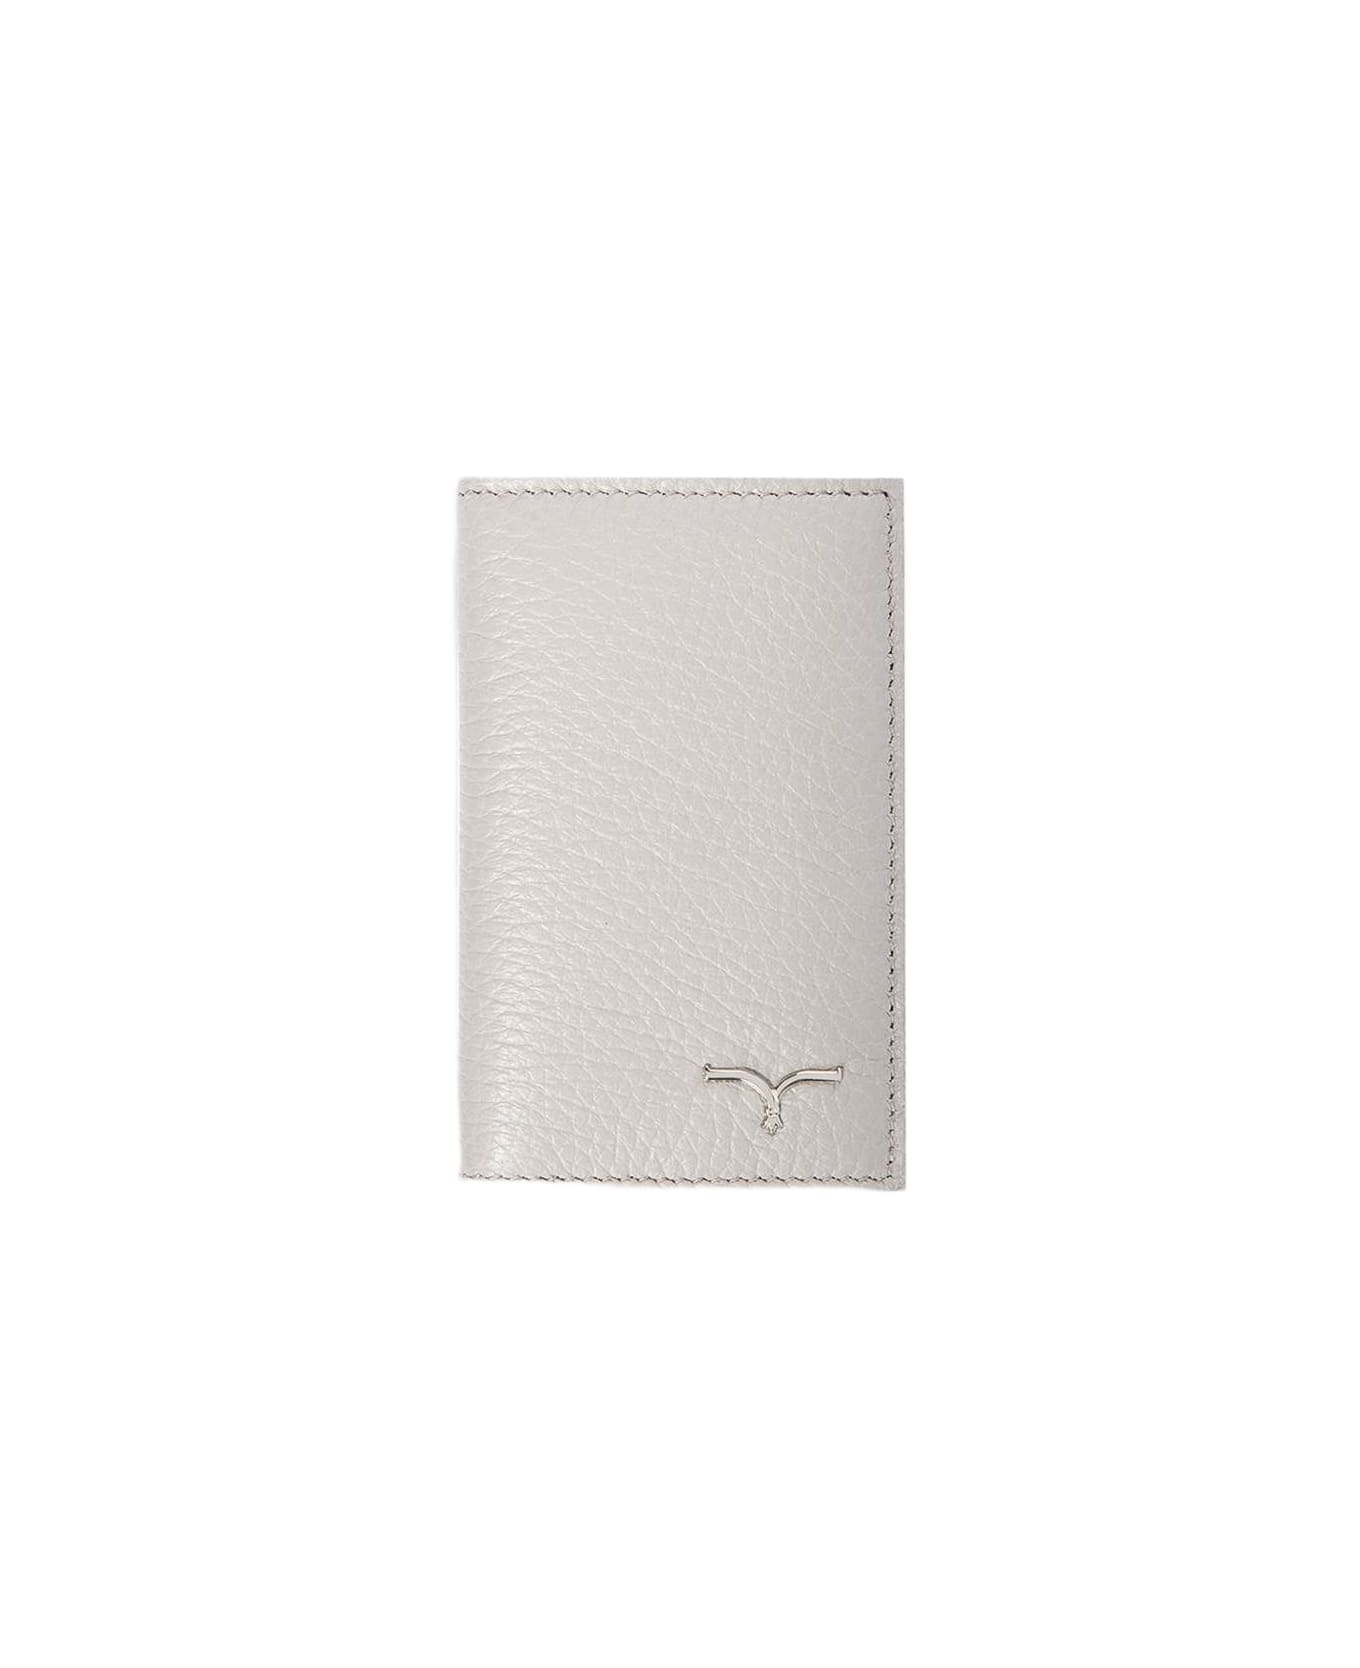 Larusmiani Card Holder 'amedeo' Wallet - DimGray